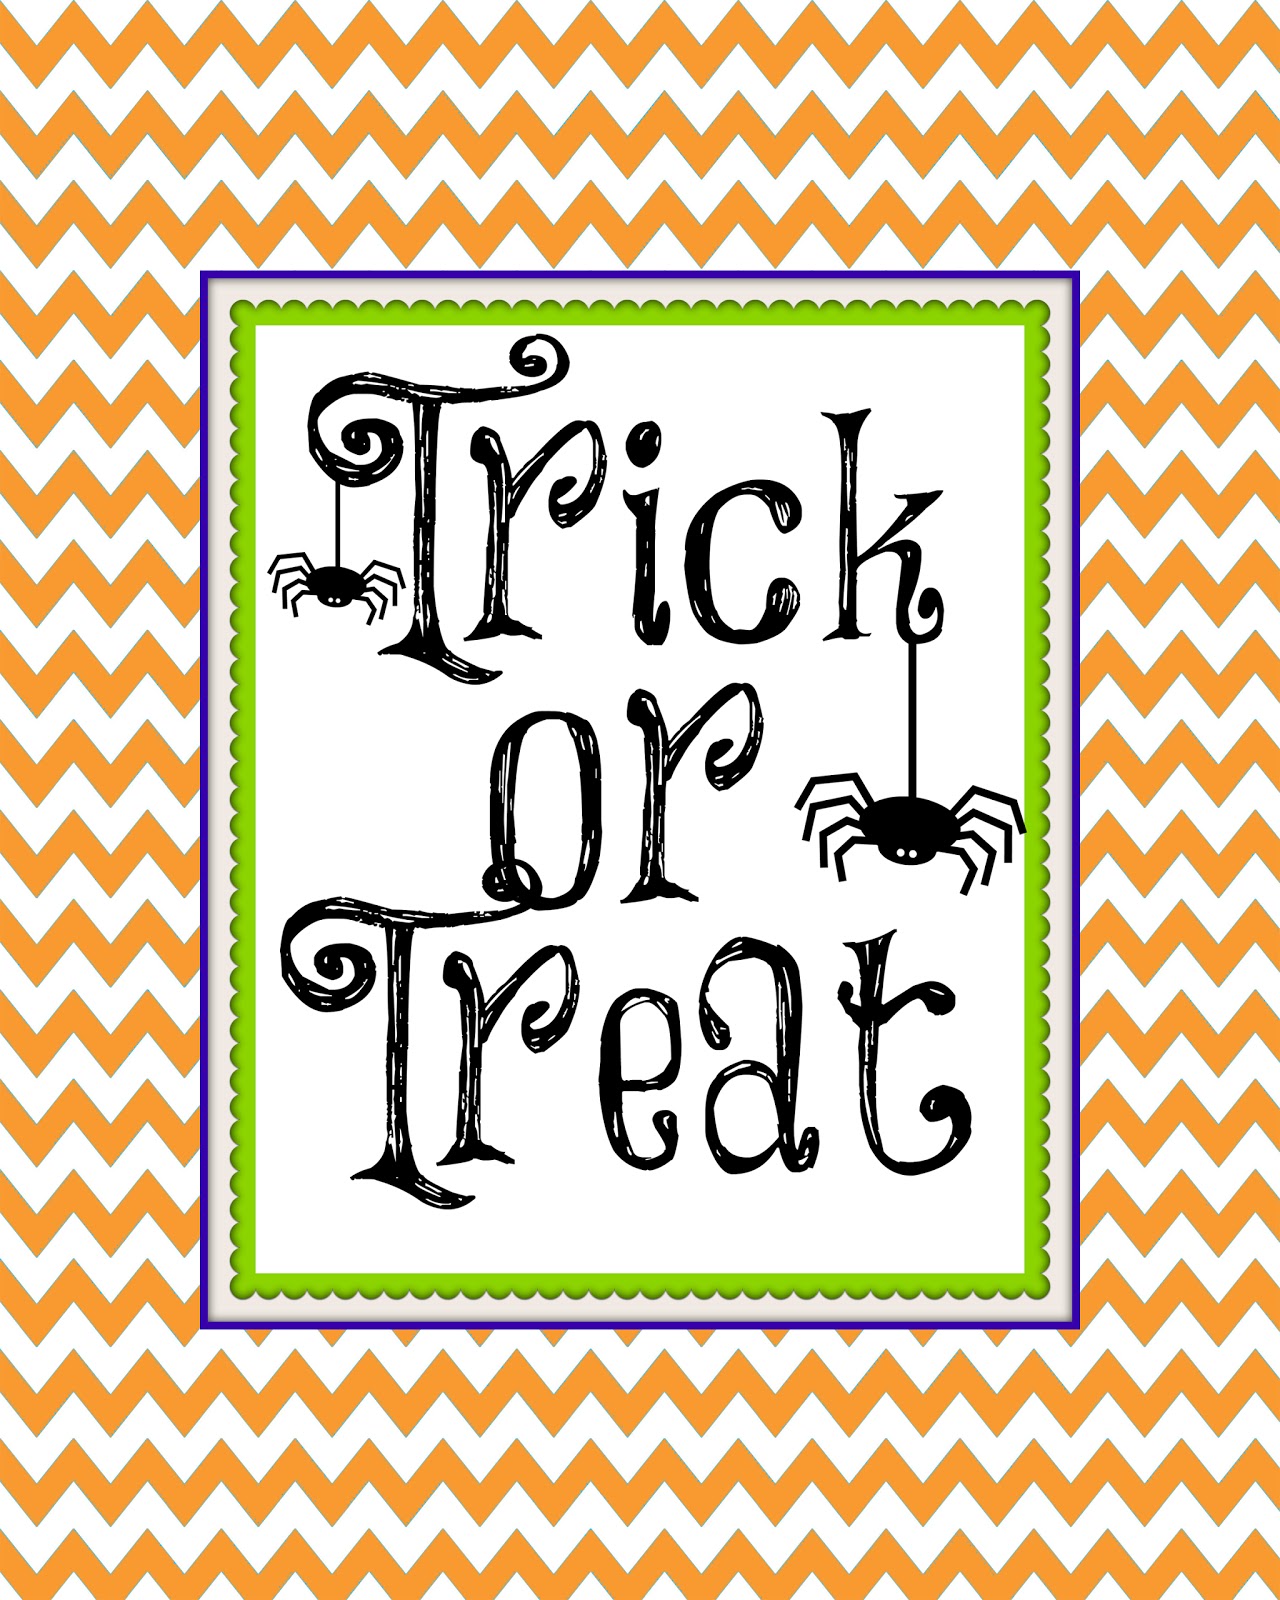 Second Chance To Dream Free Halloween Printable